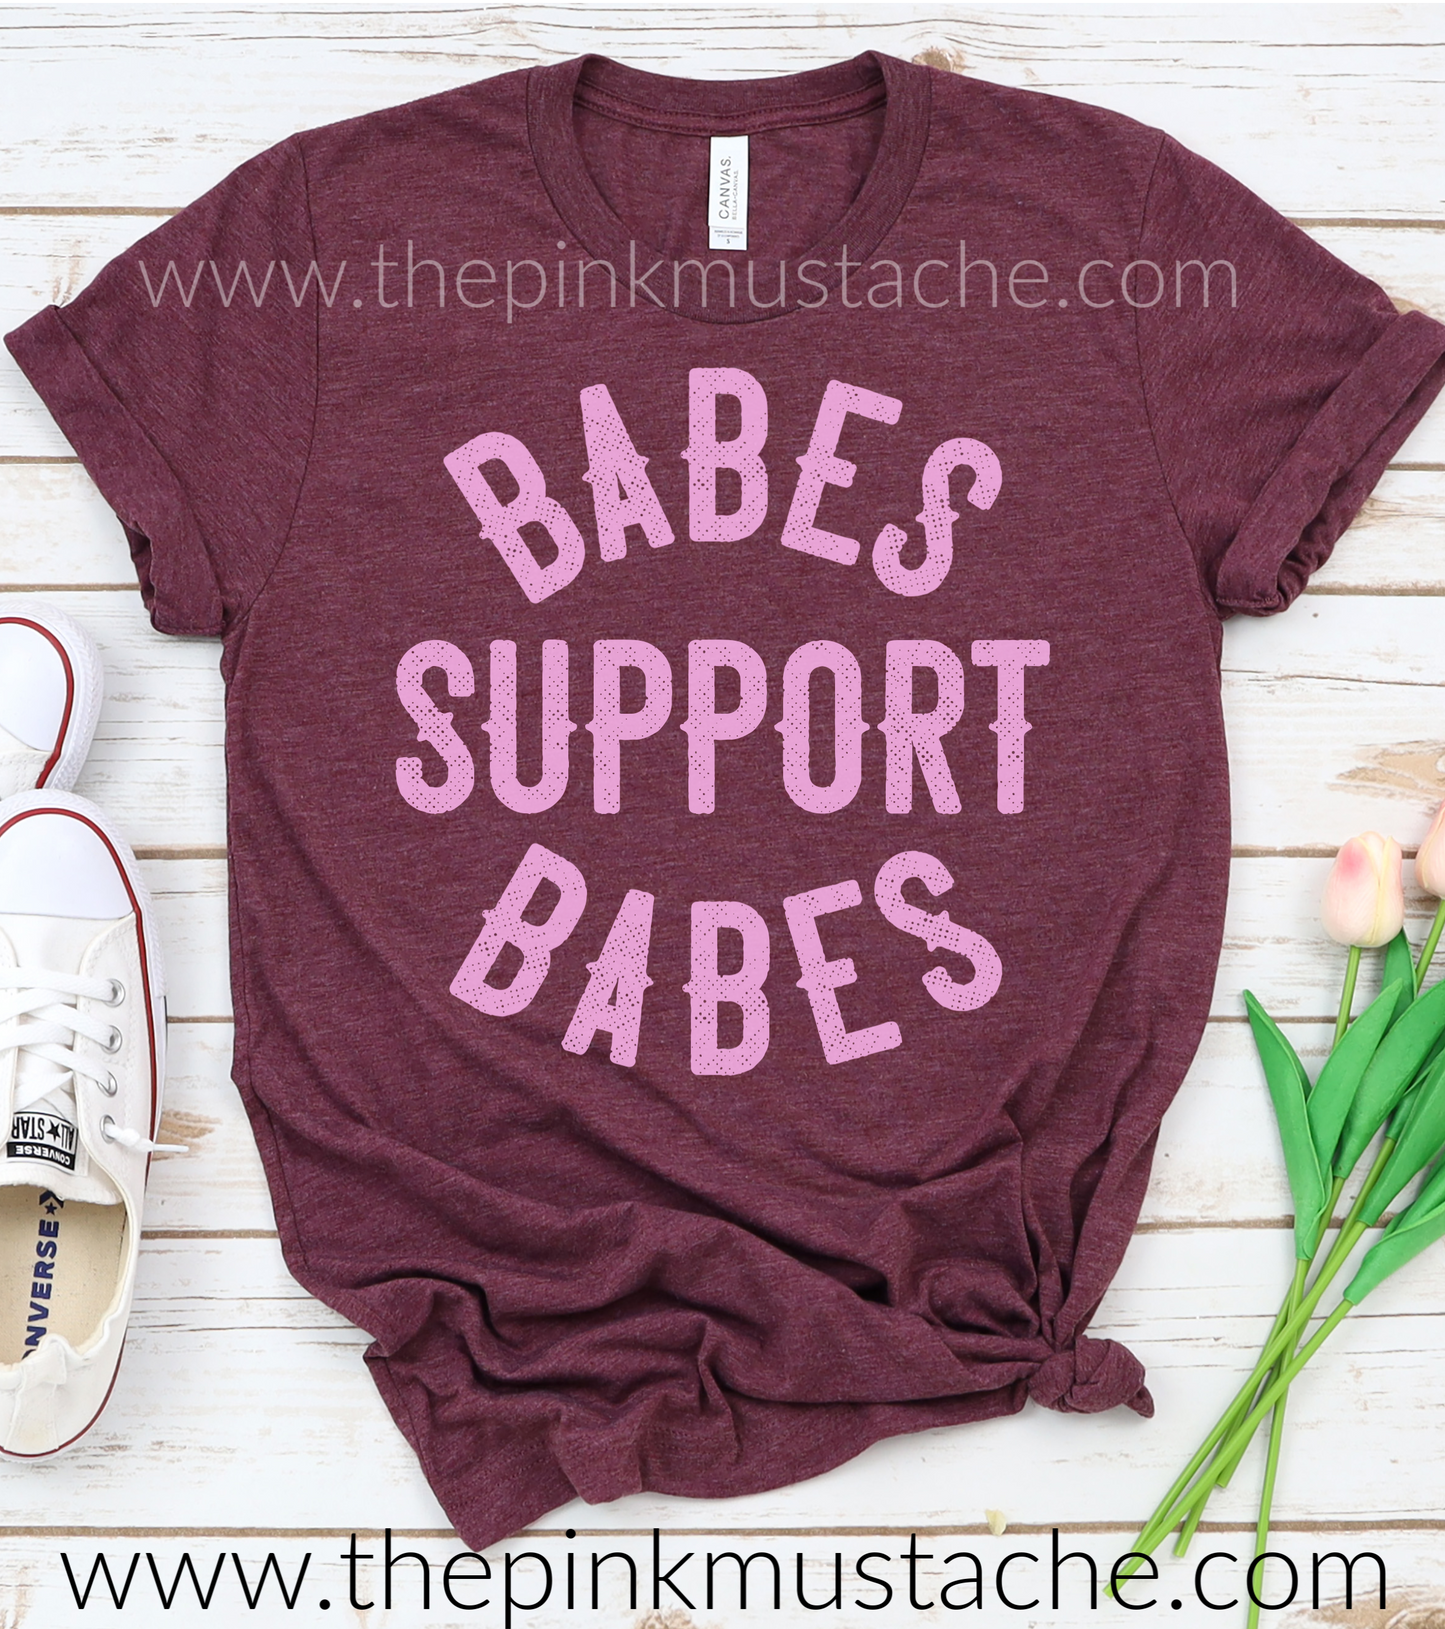 Babes Support Babes Tee/ Women Supporting Women T-Shirt - Exclusive Boutique Line- New Release